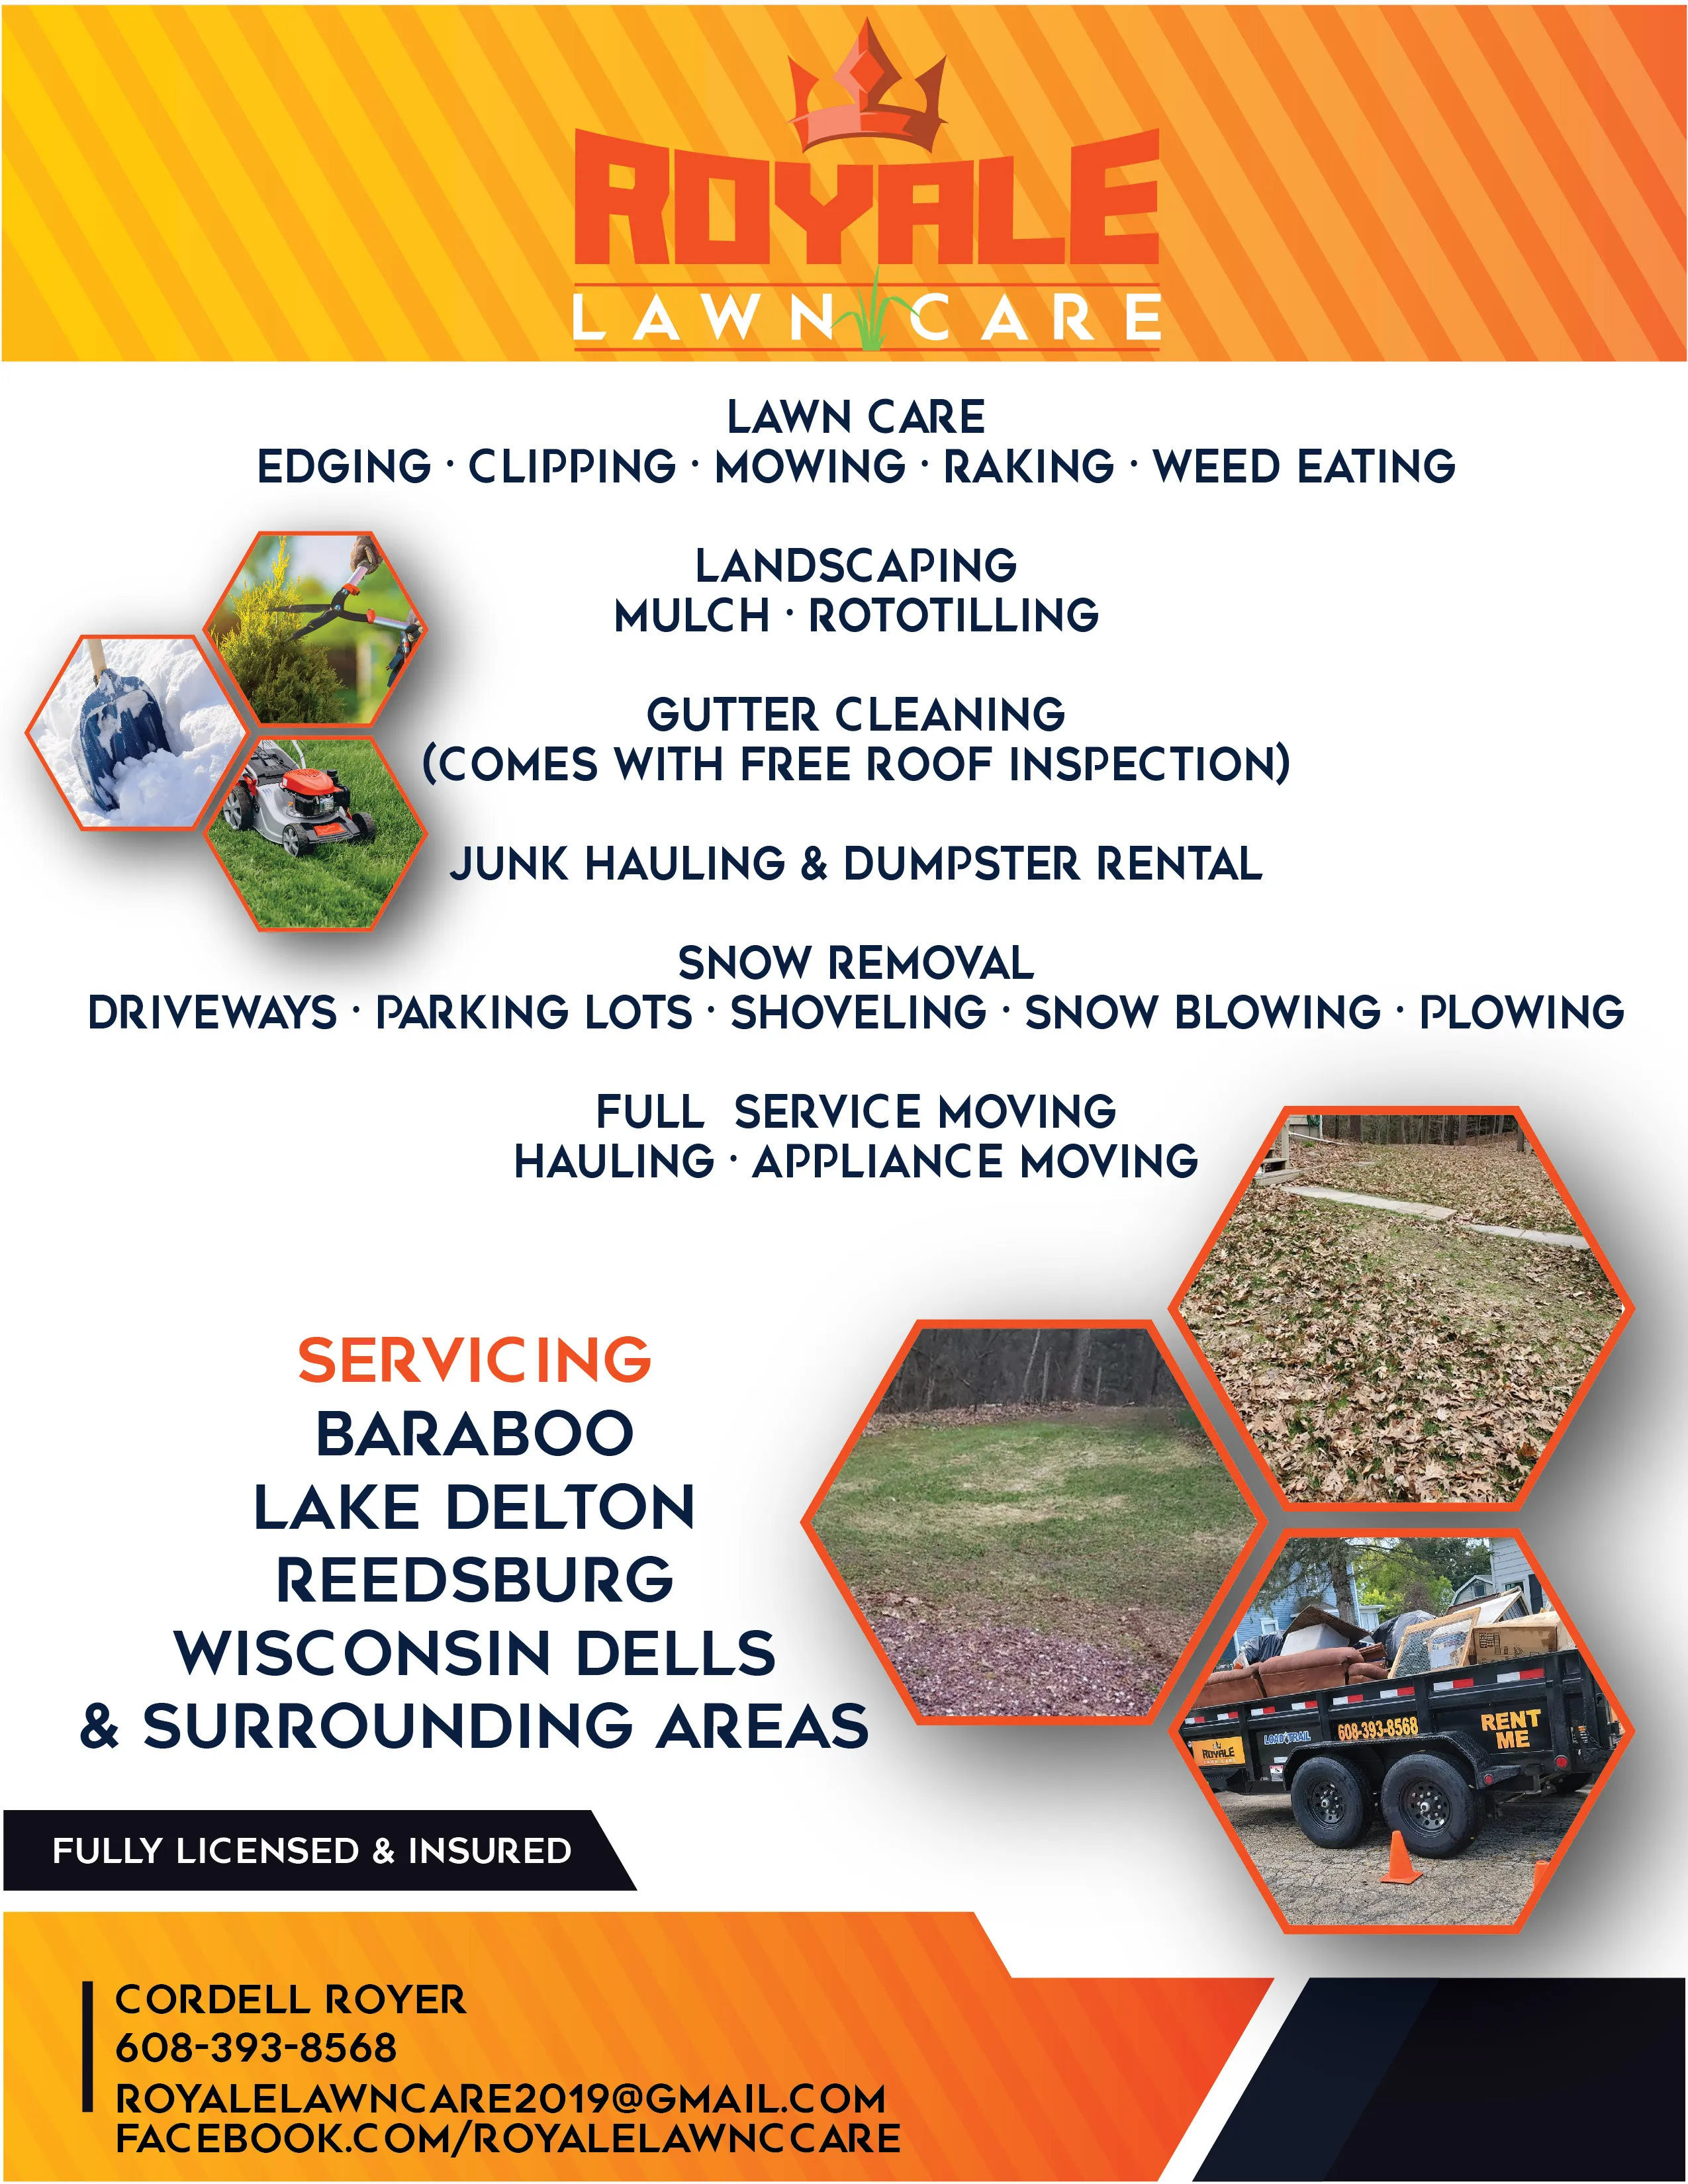 Our Services for Royale Lawn Care and Maintenance LLC in Reedsburg, WI